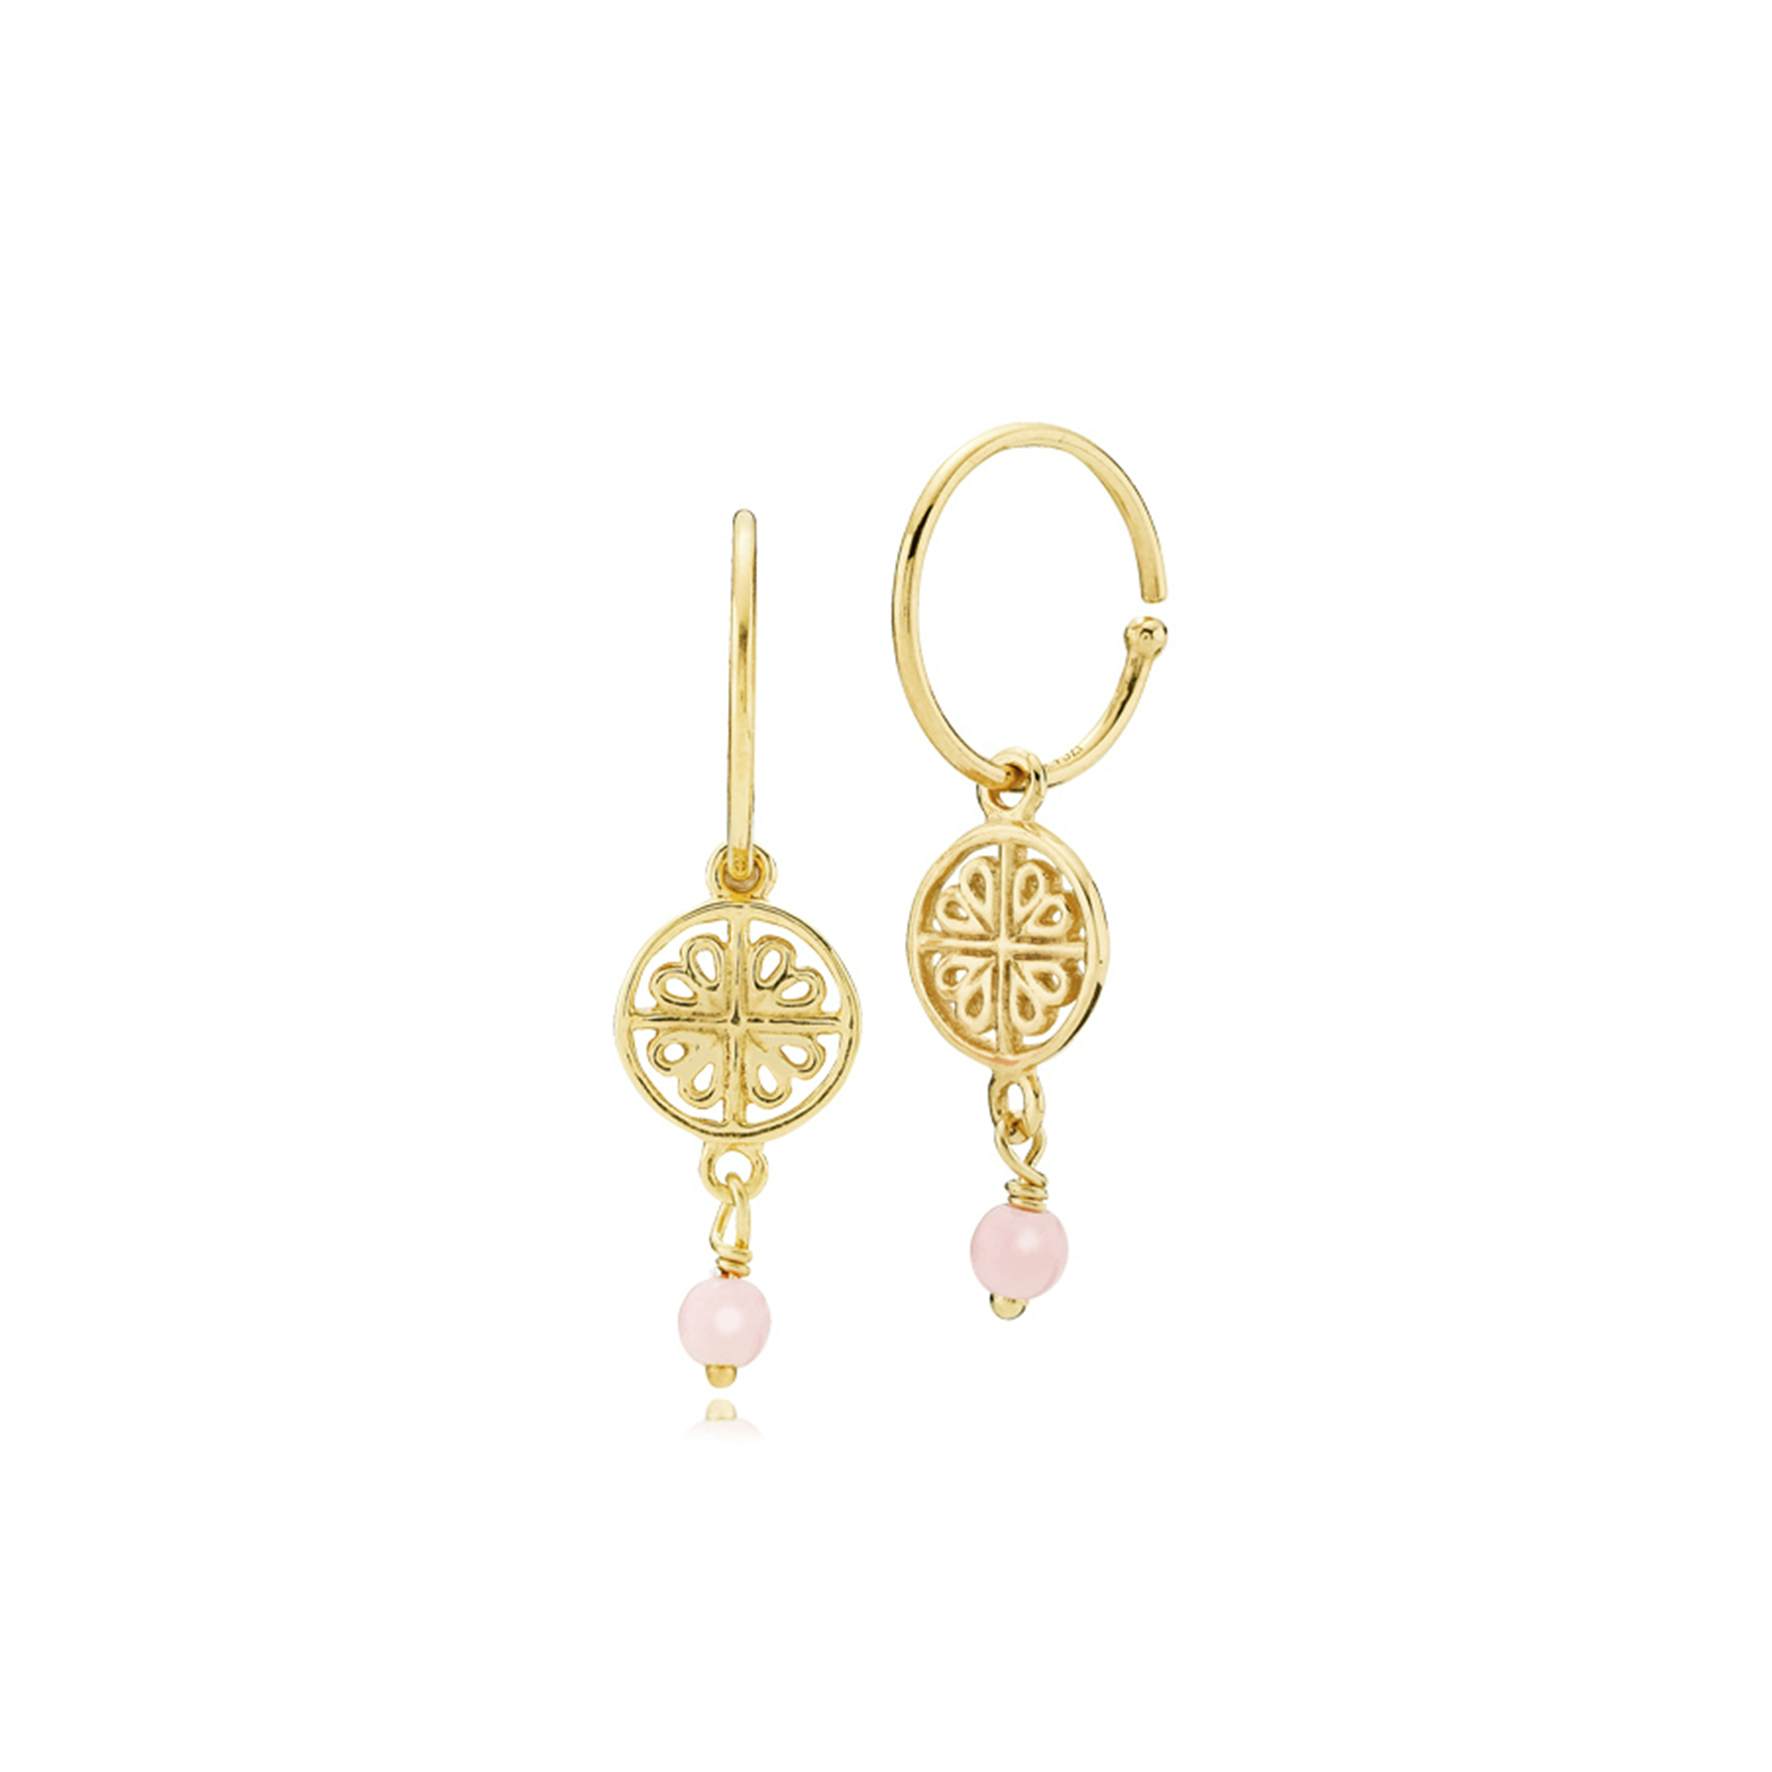 Balance Creol Earrings Pink from Sistie in Goldplated-Silver Sterling 925|Freshwater Pearl|Blank